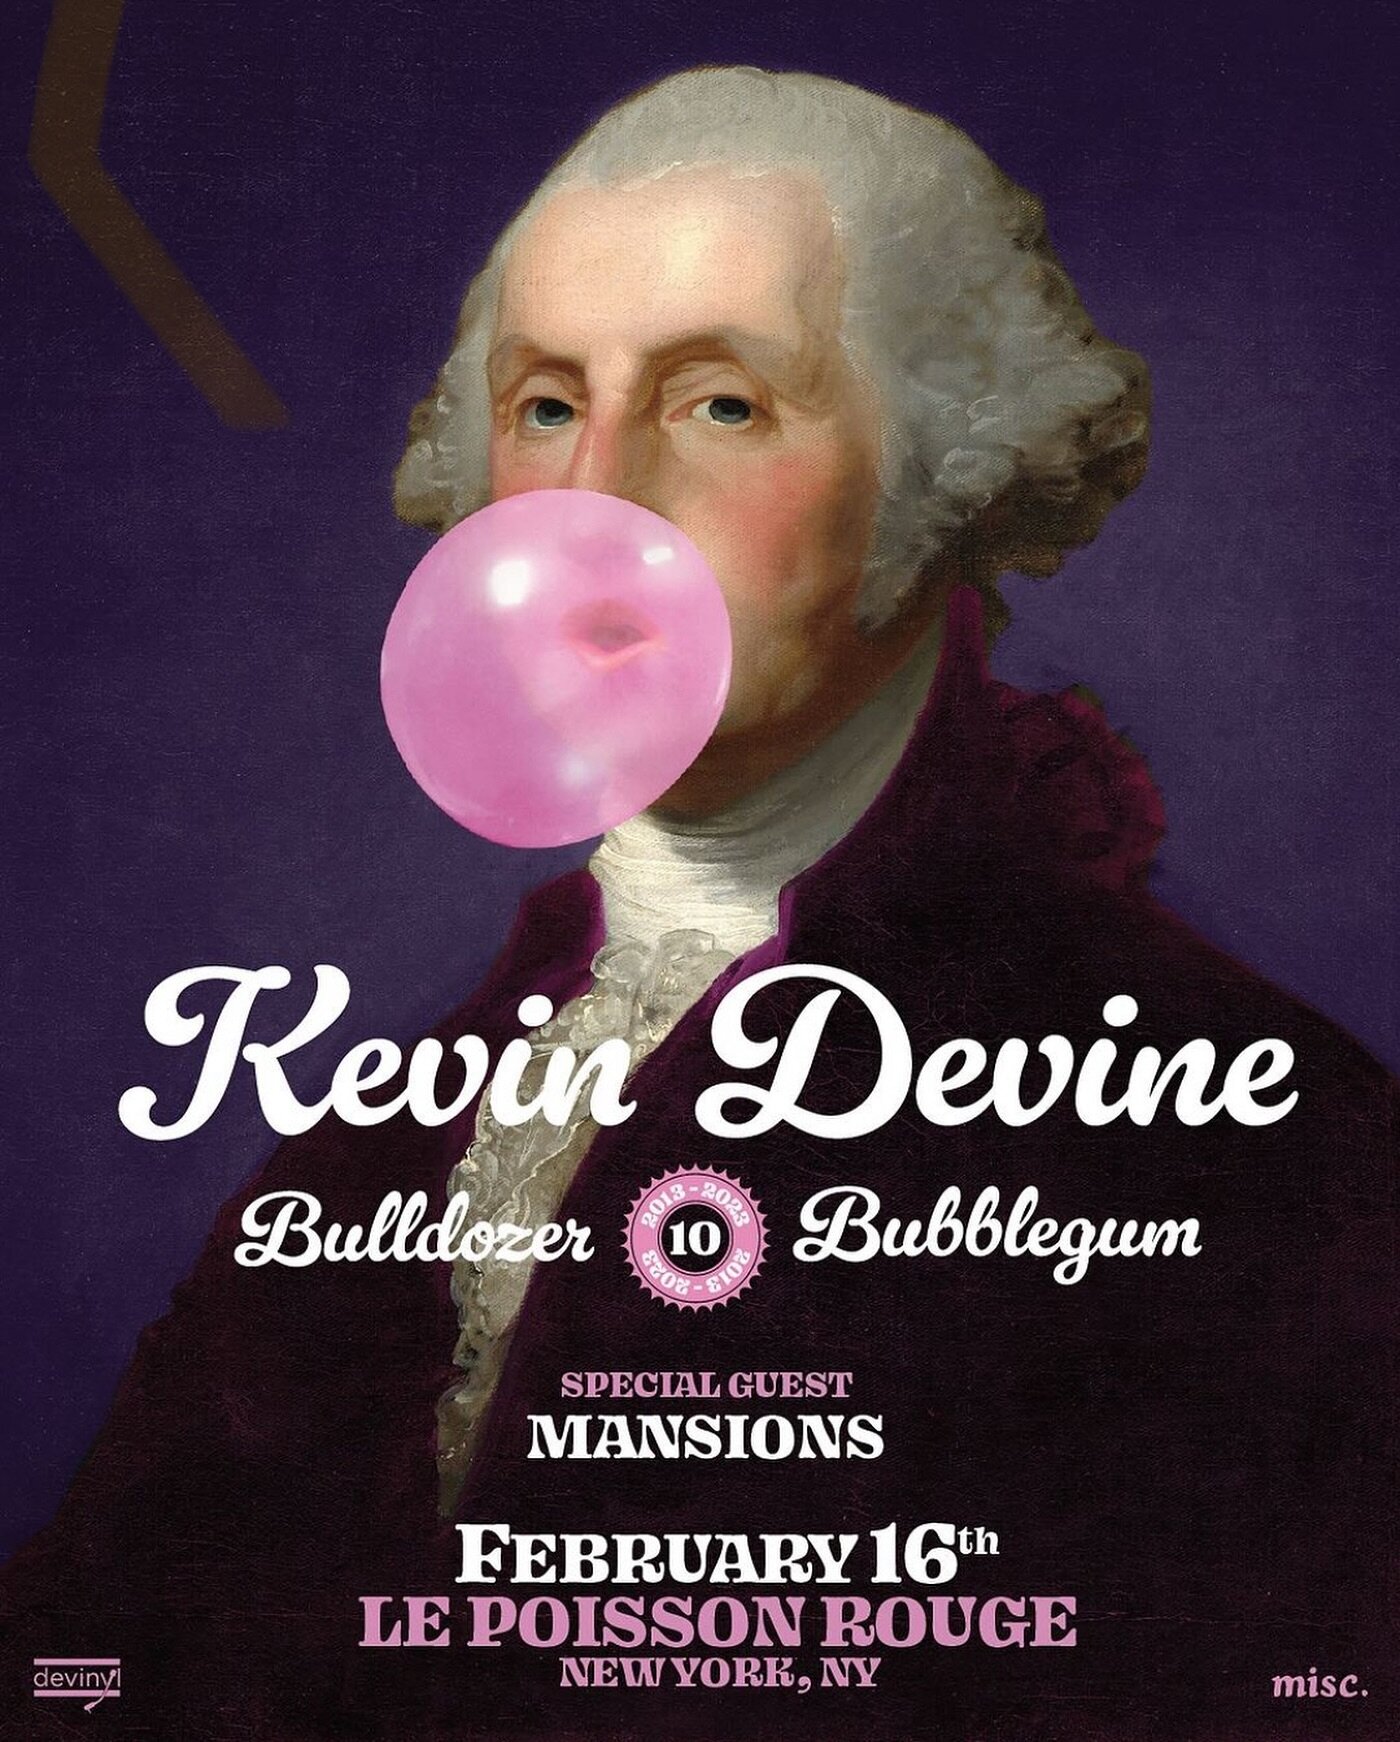 NYC in February! Honored to be part of the 10-year anniversary of @kevinpdevine&rsquo;s Bulldozer and Bubblegum. This one will be full band, tix on sale tomorrow at noon eastern!!!